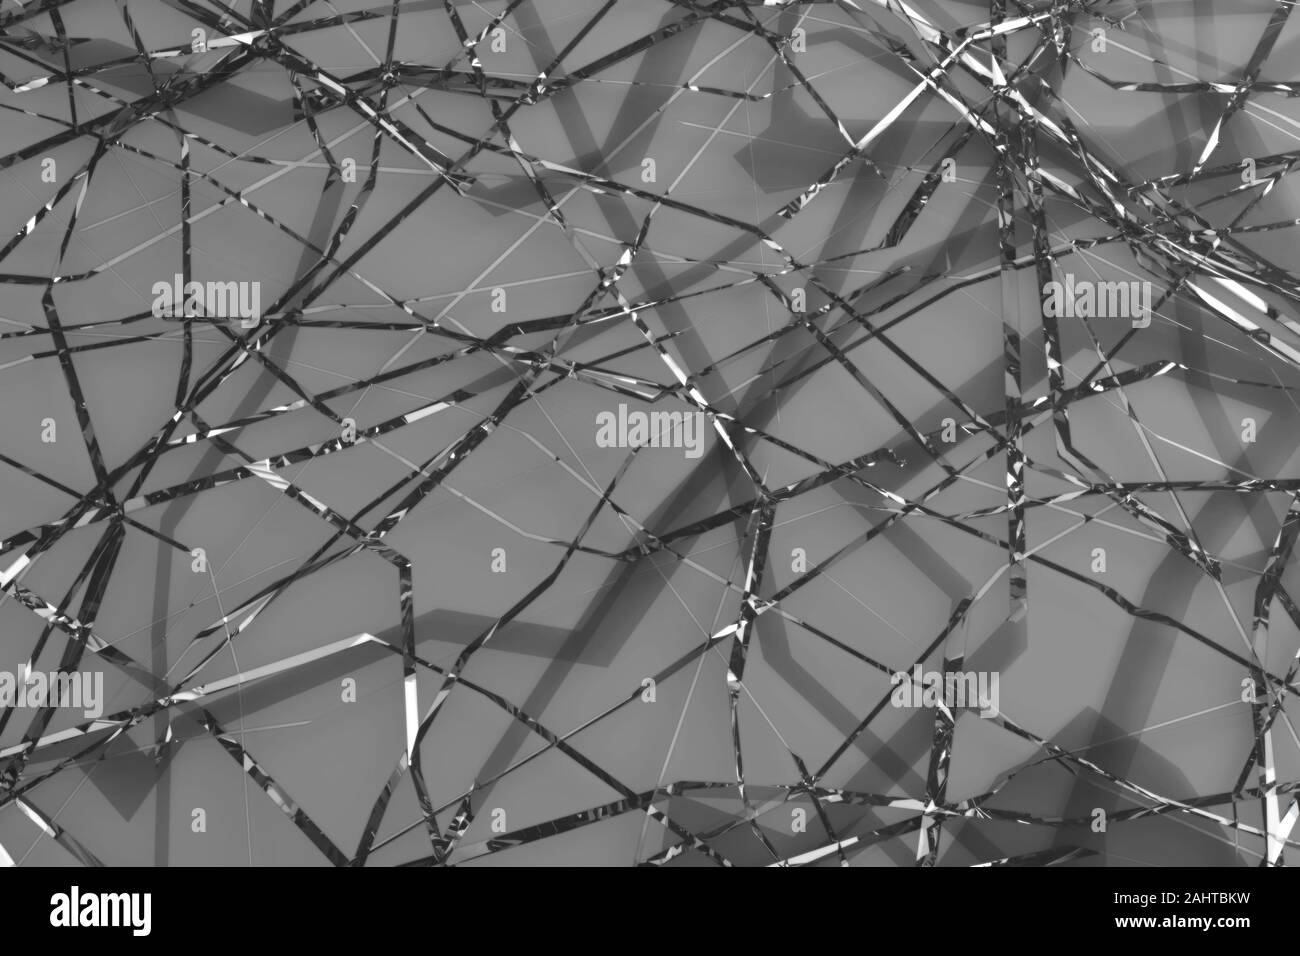 Shattered glass with dimmed light. Stock Photo